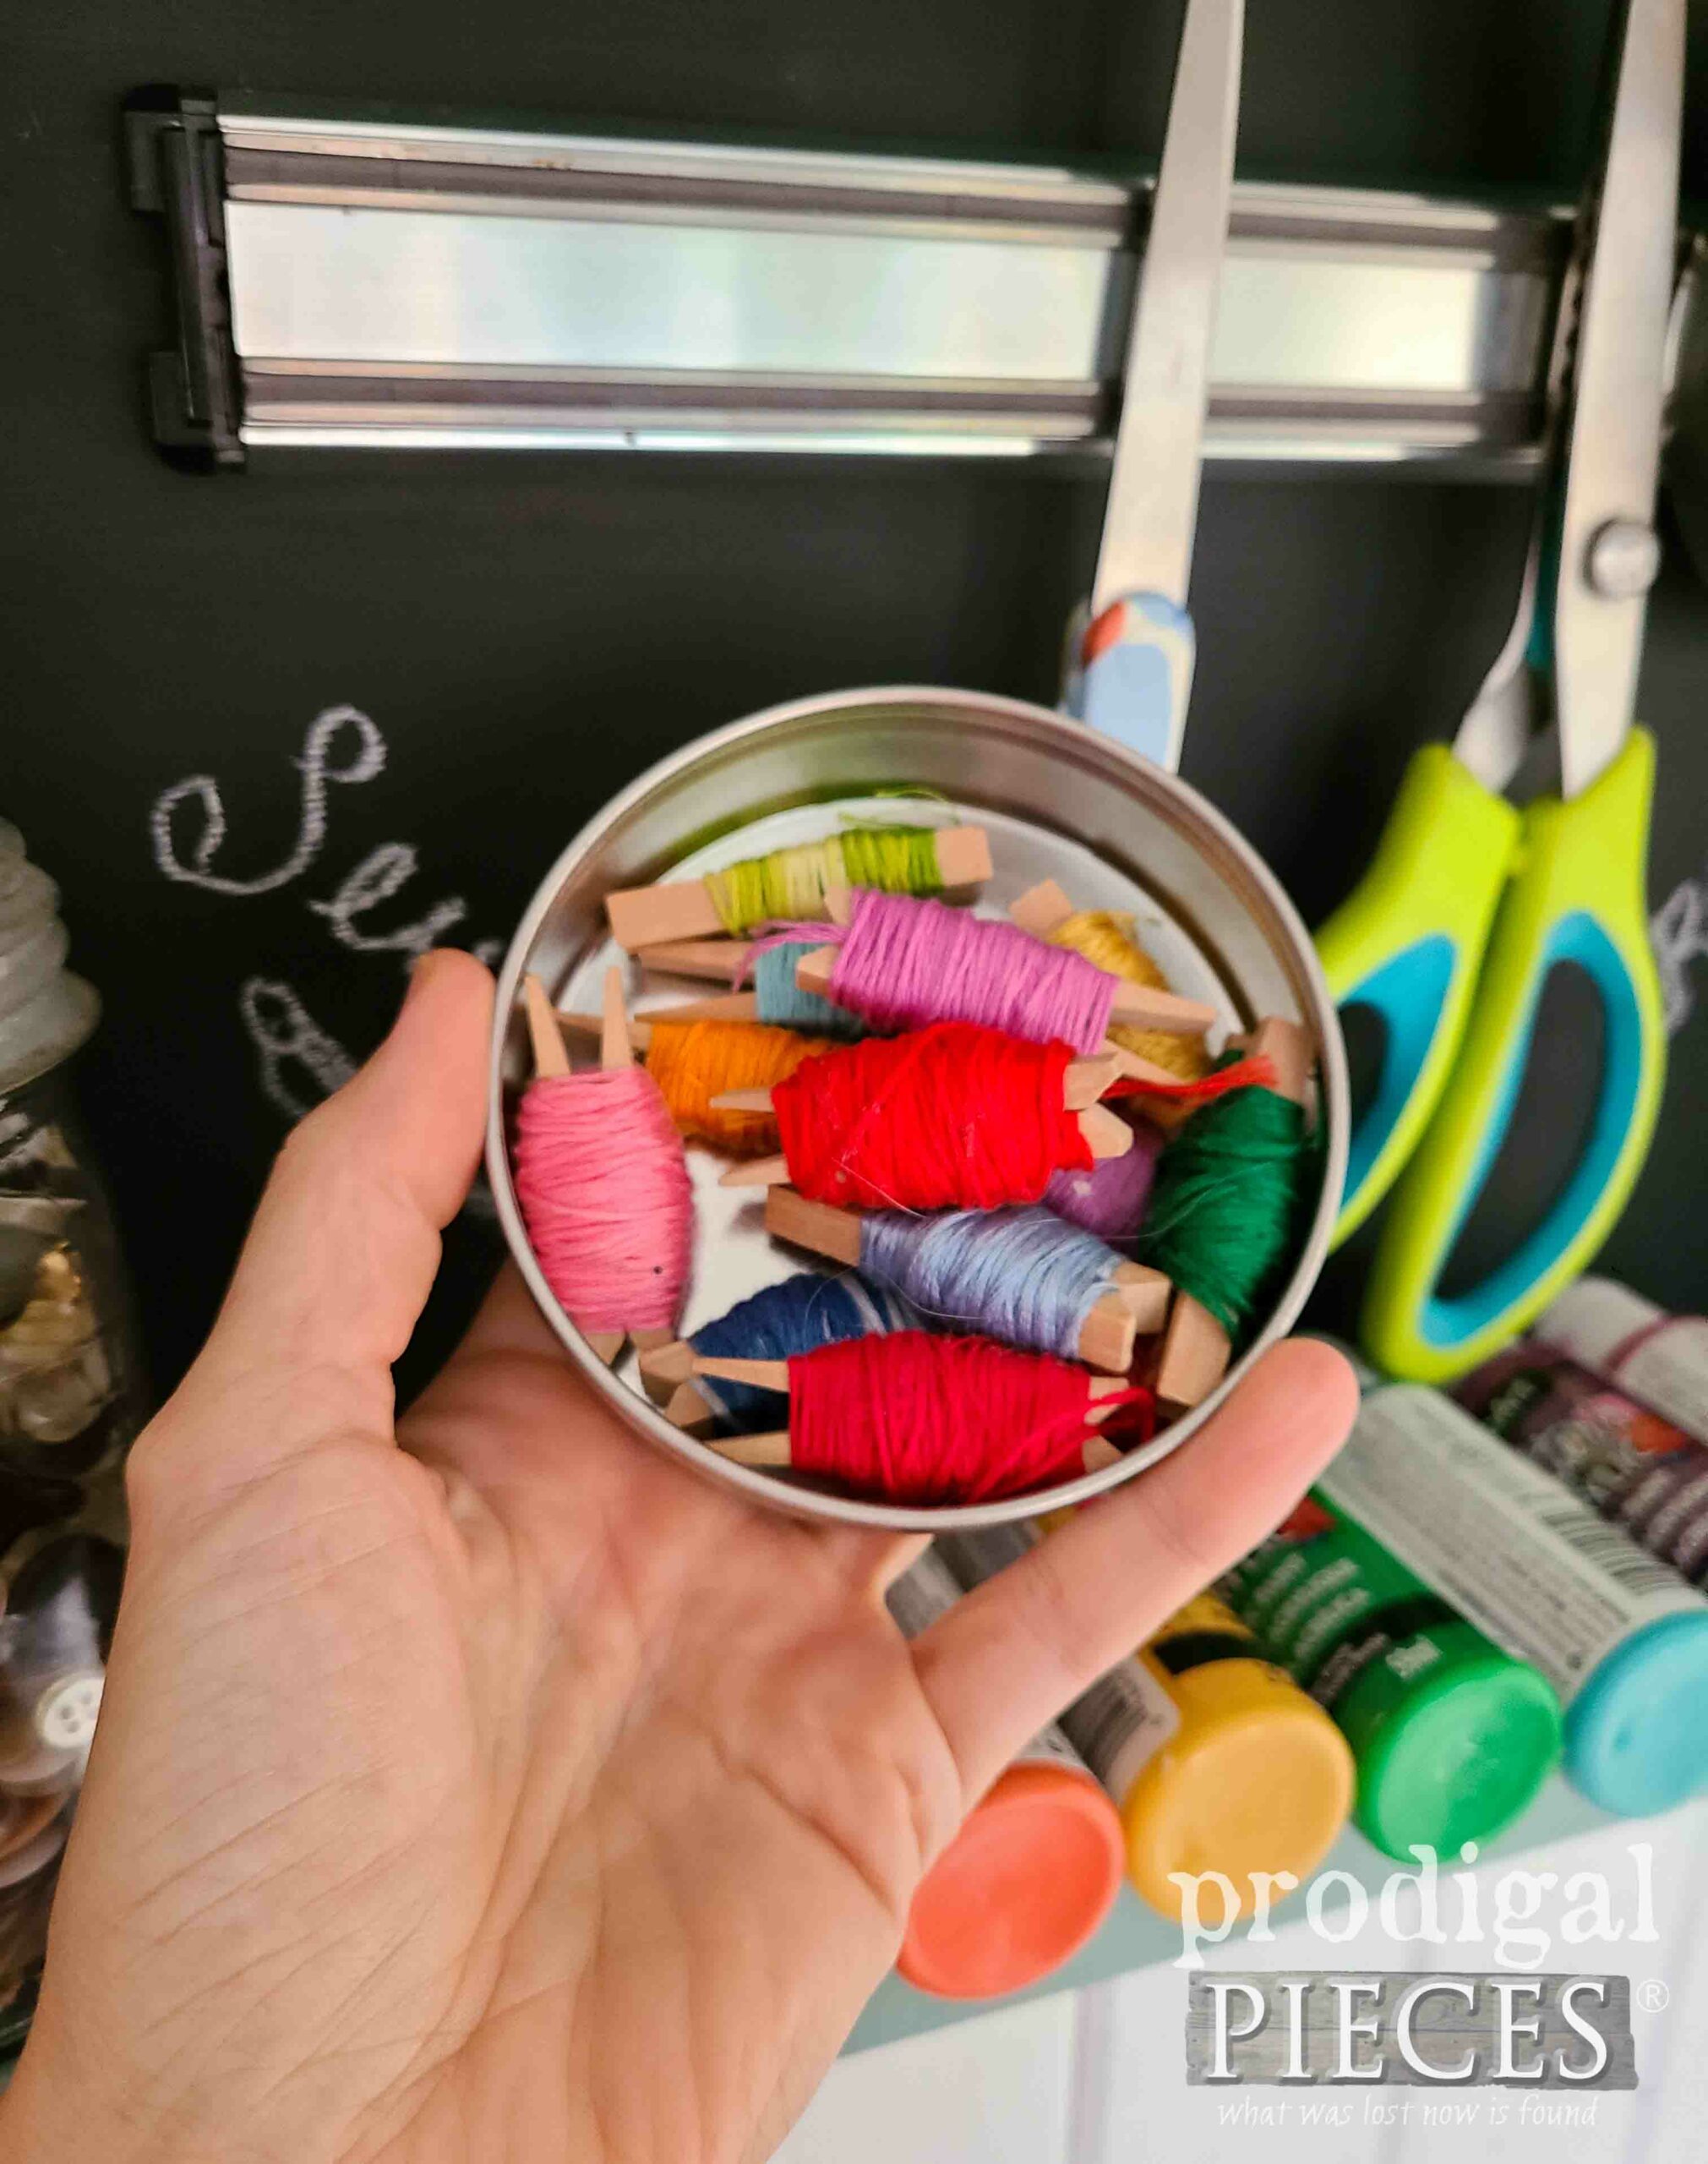 Embroidery Floss Tin in Upcycled Vanity Drawer by Larissa of Prodigal Pieces | prodigalpieces.com #prodigalpieces #sewing #storage